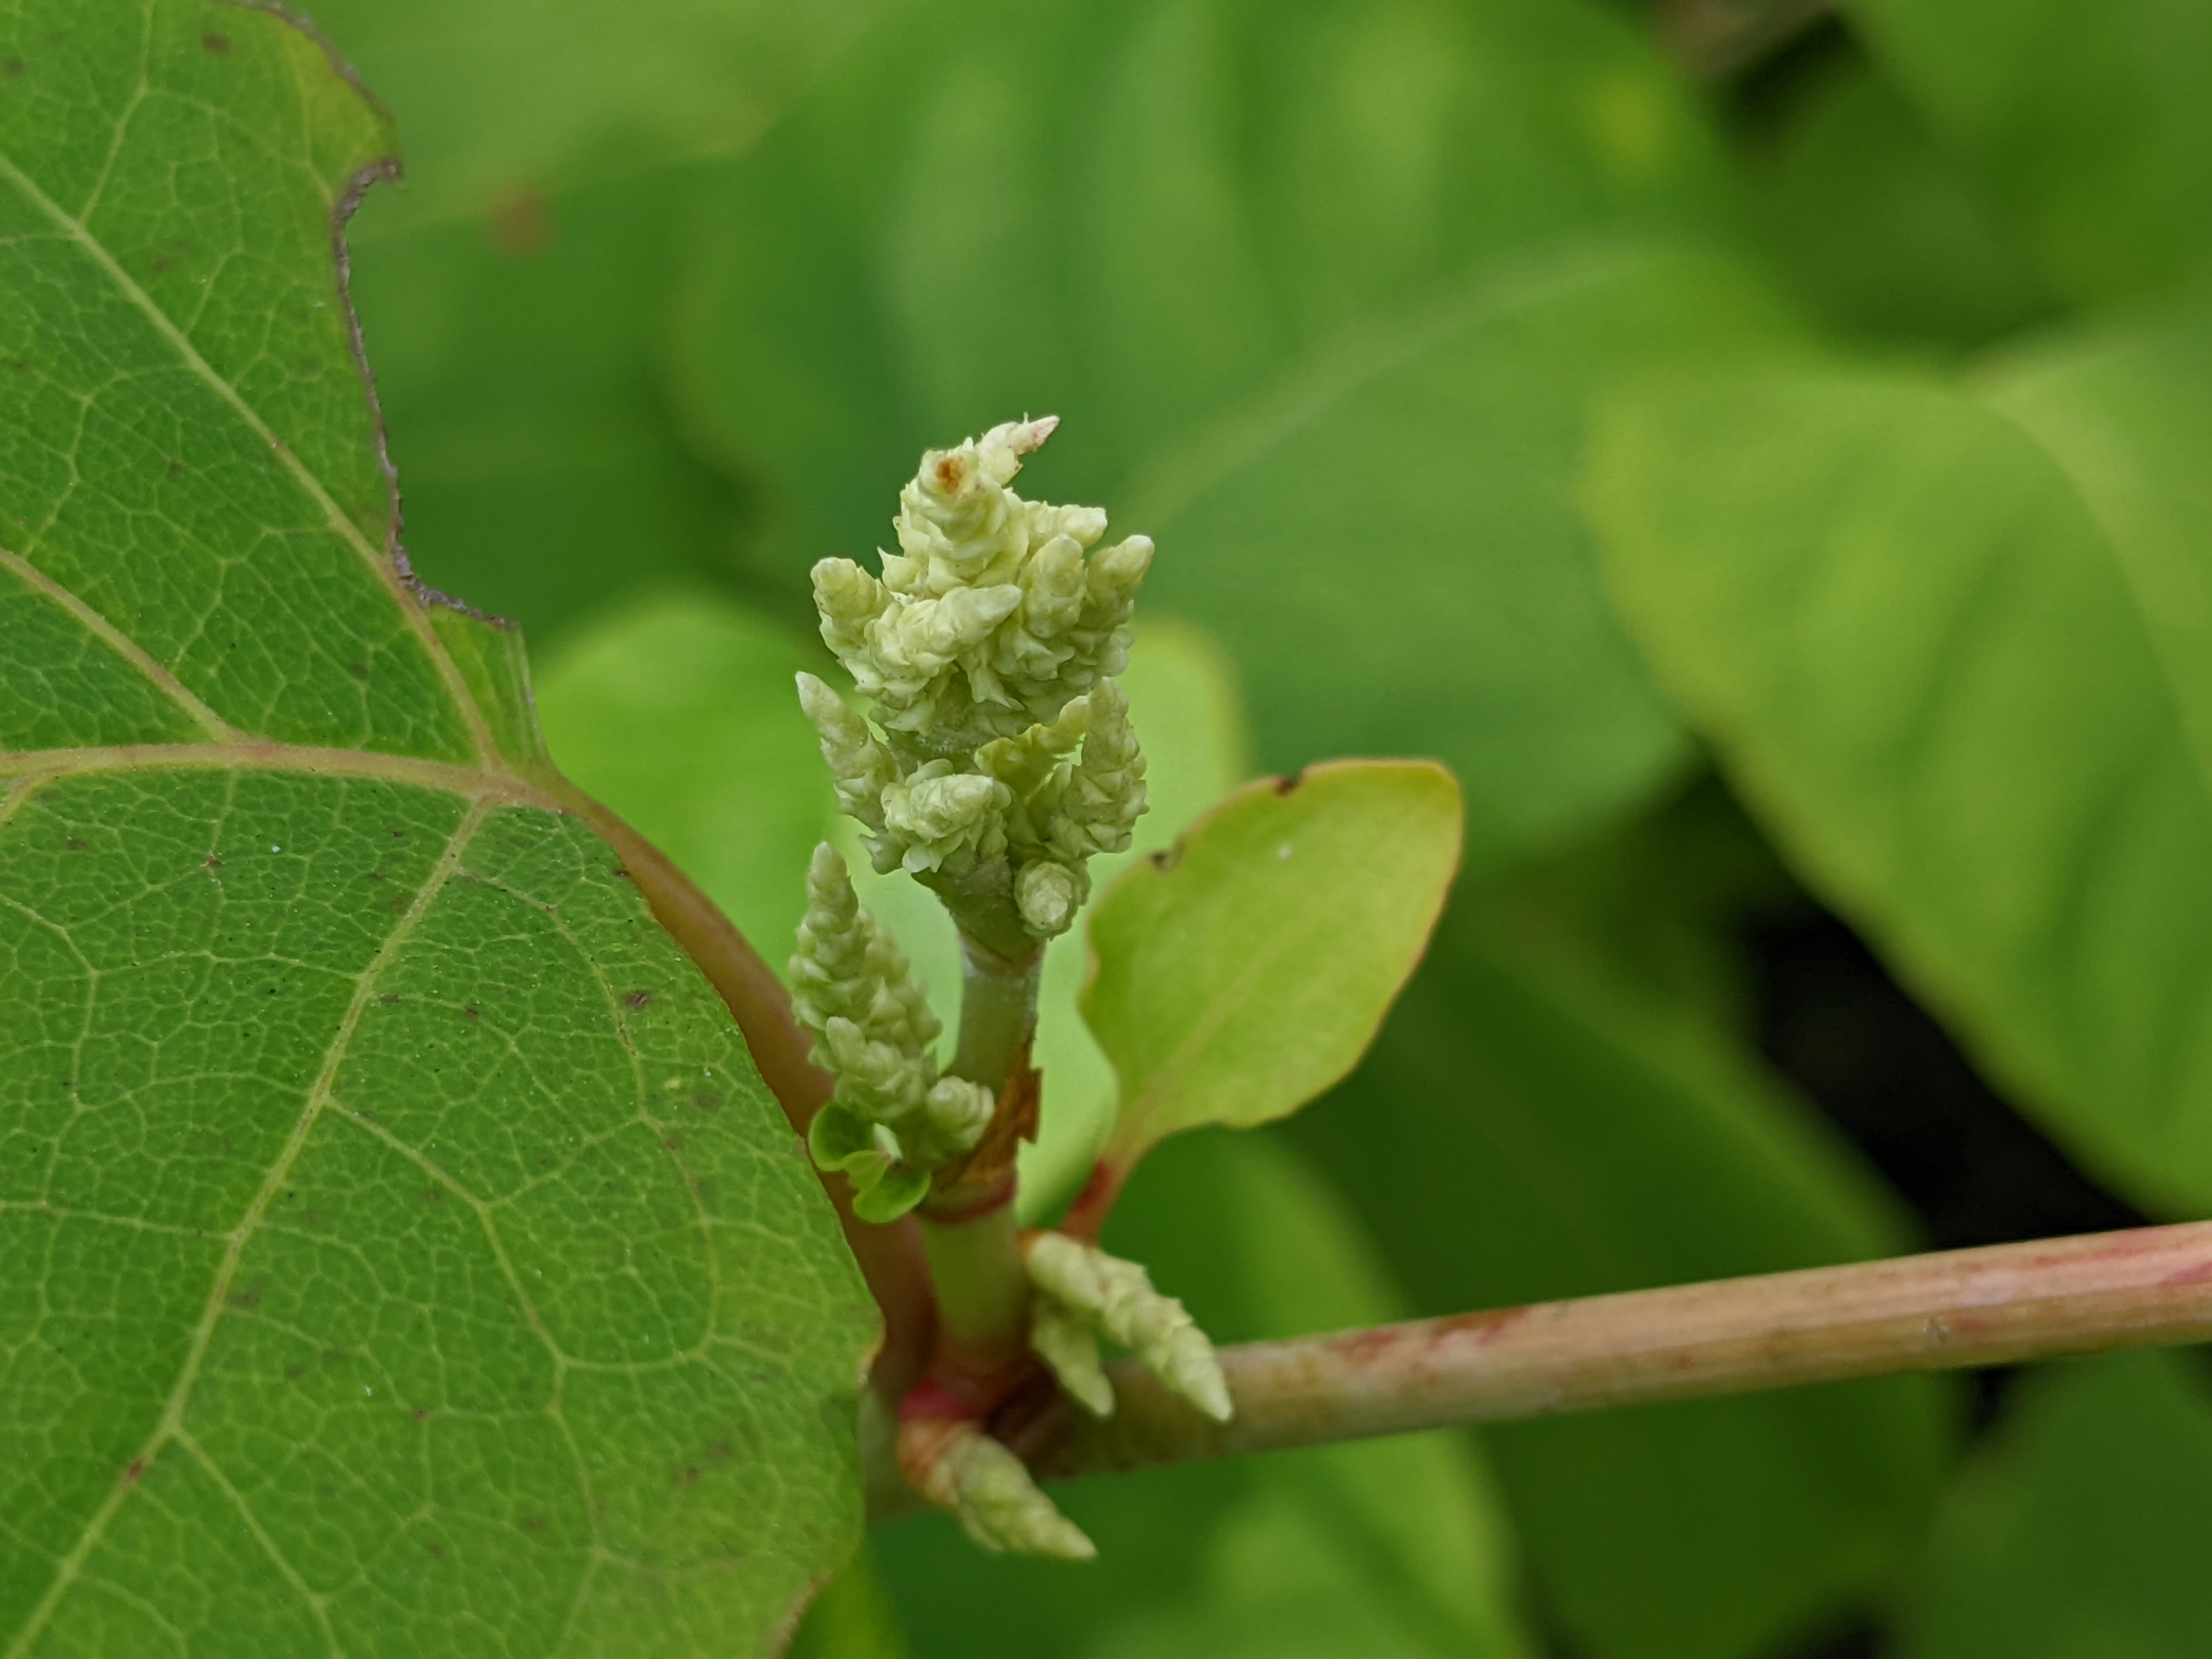 A cluster of new flower buds on a knotweed plant